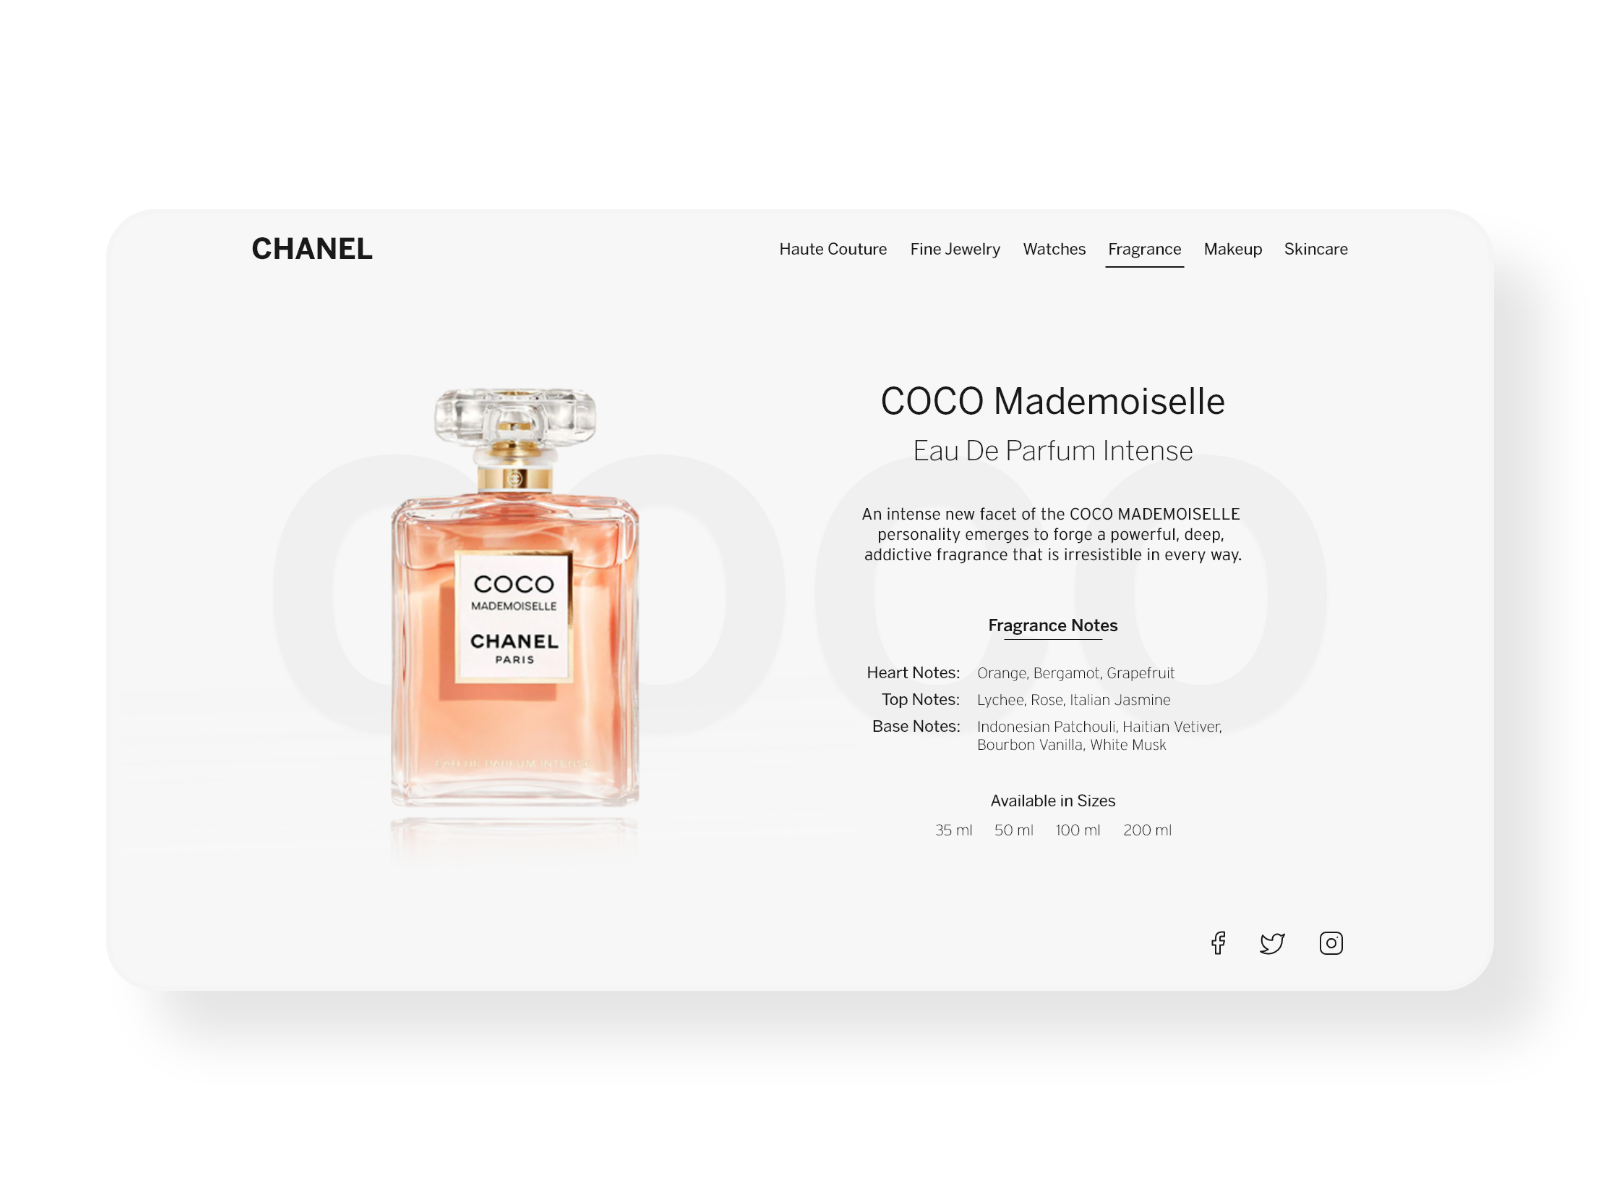 Chanel Coco Mademoiselle by Jahnavi Seth on Dribbble